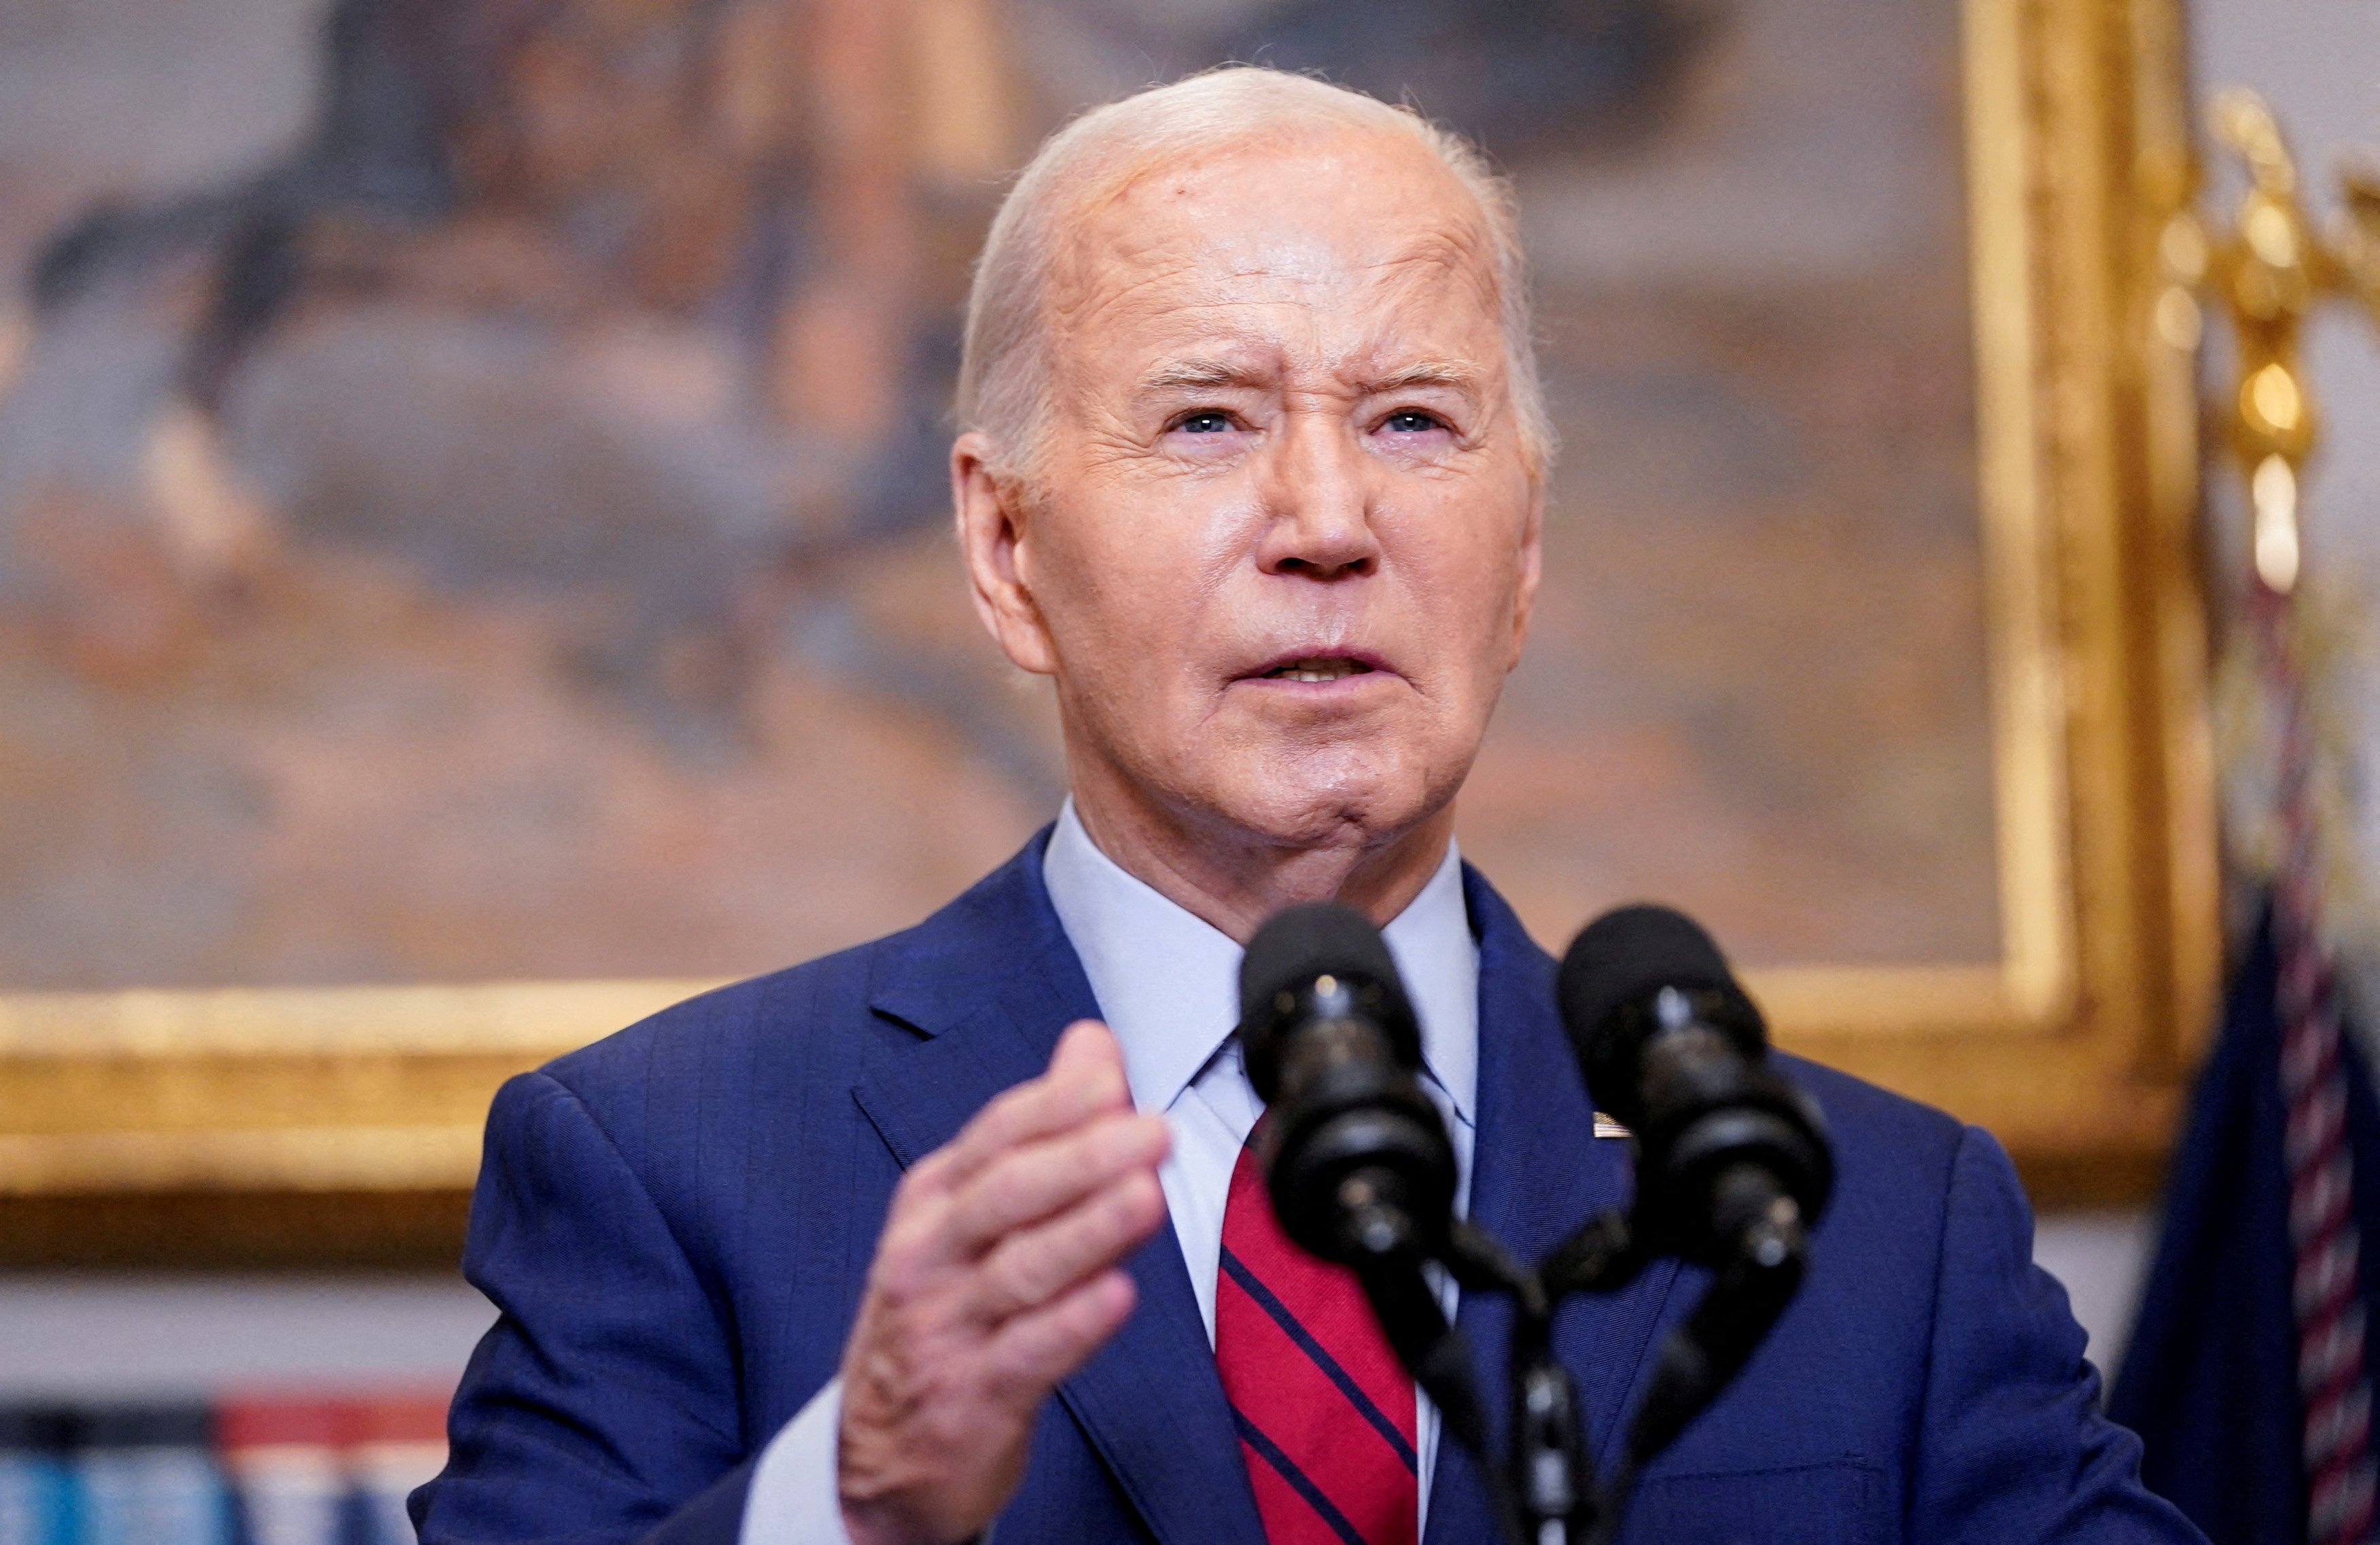 US President Joe Biden used his executive privilege to block the release of an interview he had with special counsel Robert Hur. Photo: Reuters